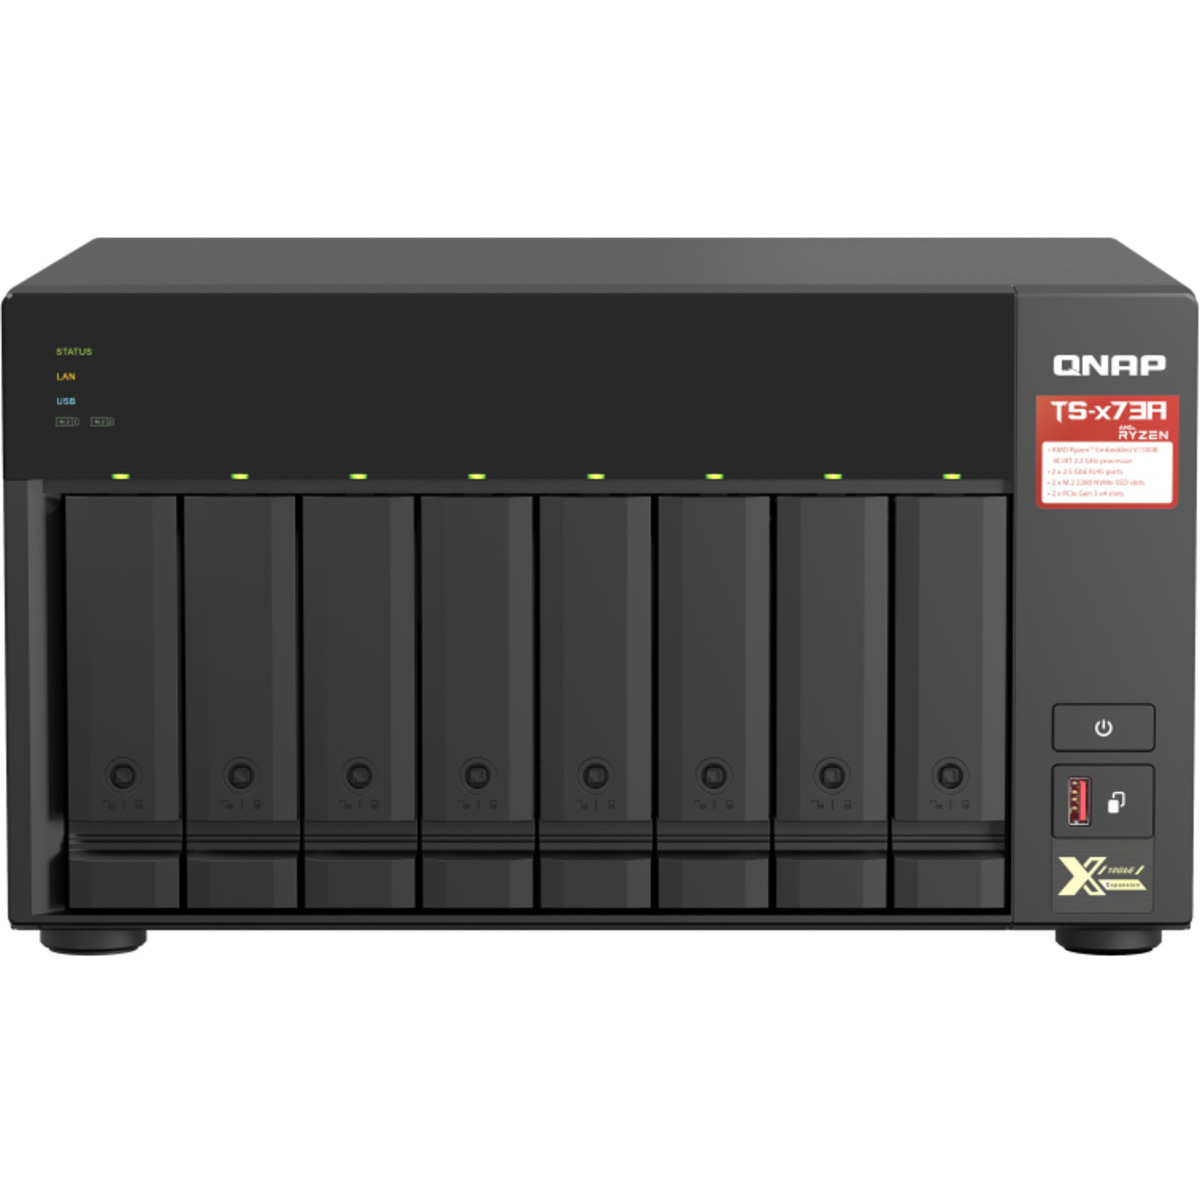 buy $2122 QNAP TS-873A 32tb Desktop NAS - Network Attached Storage Device 8x4000gb Western Digital Blue WD40EZRZ 3.5 5400rpm SATA 6Gb/s HDD CONSUMER Class Drives Installed - Burn-In Tested - nas headquarters buy network attached storage server device das new raid-5 free shipping usa TS-873A